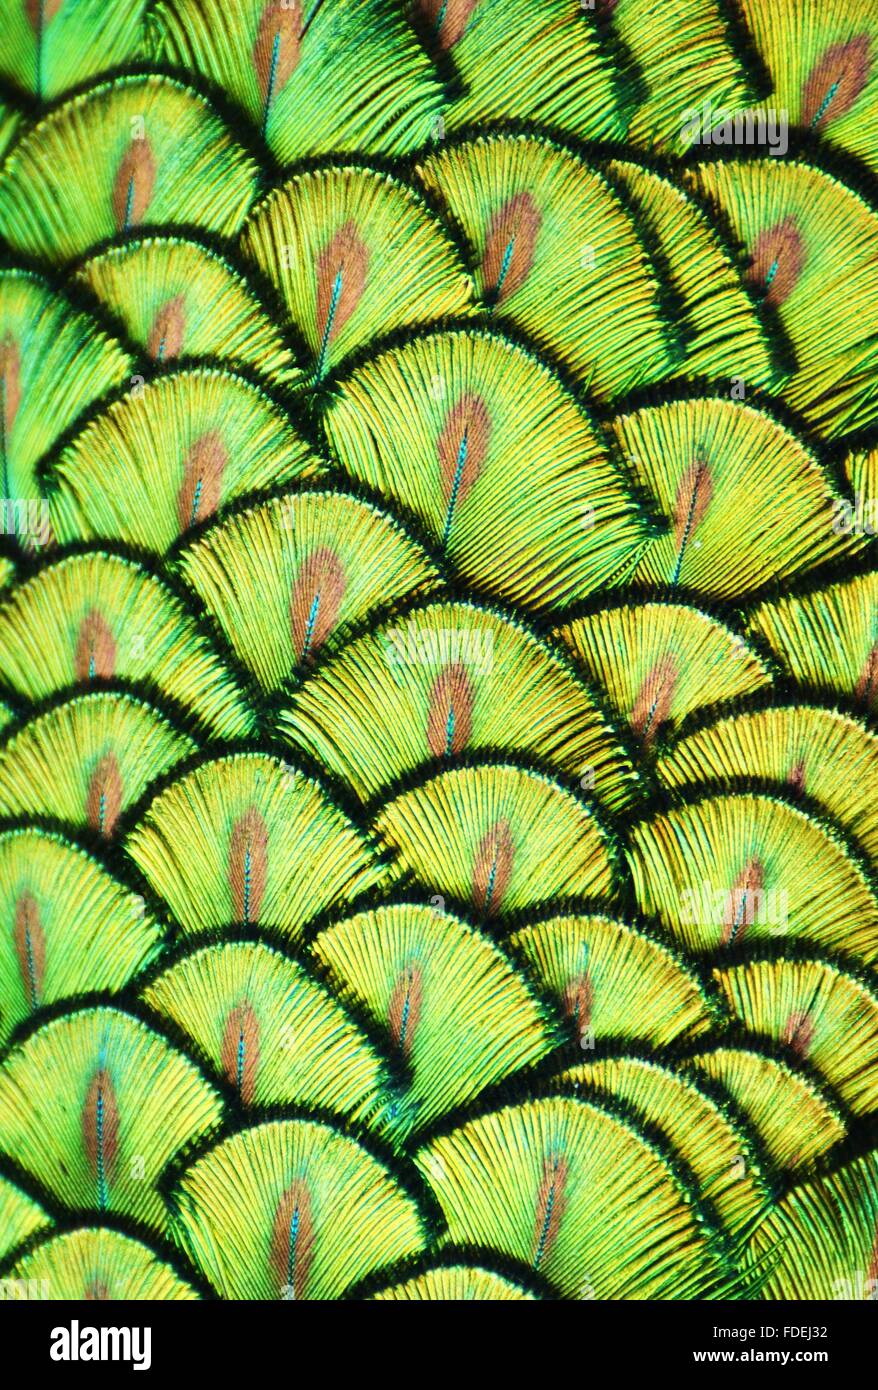 Green bird feathers from a peacock Stock Photo